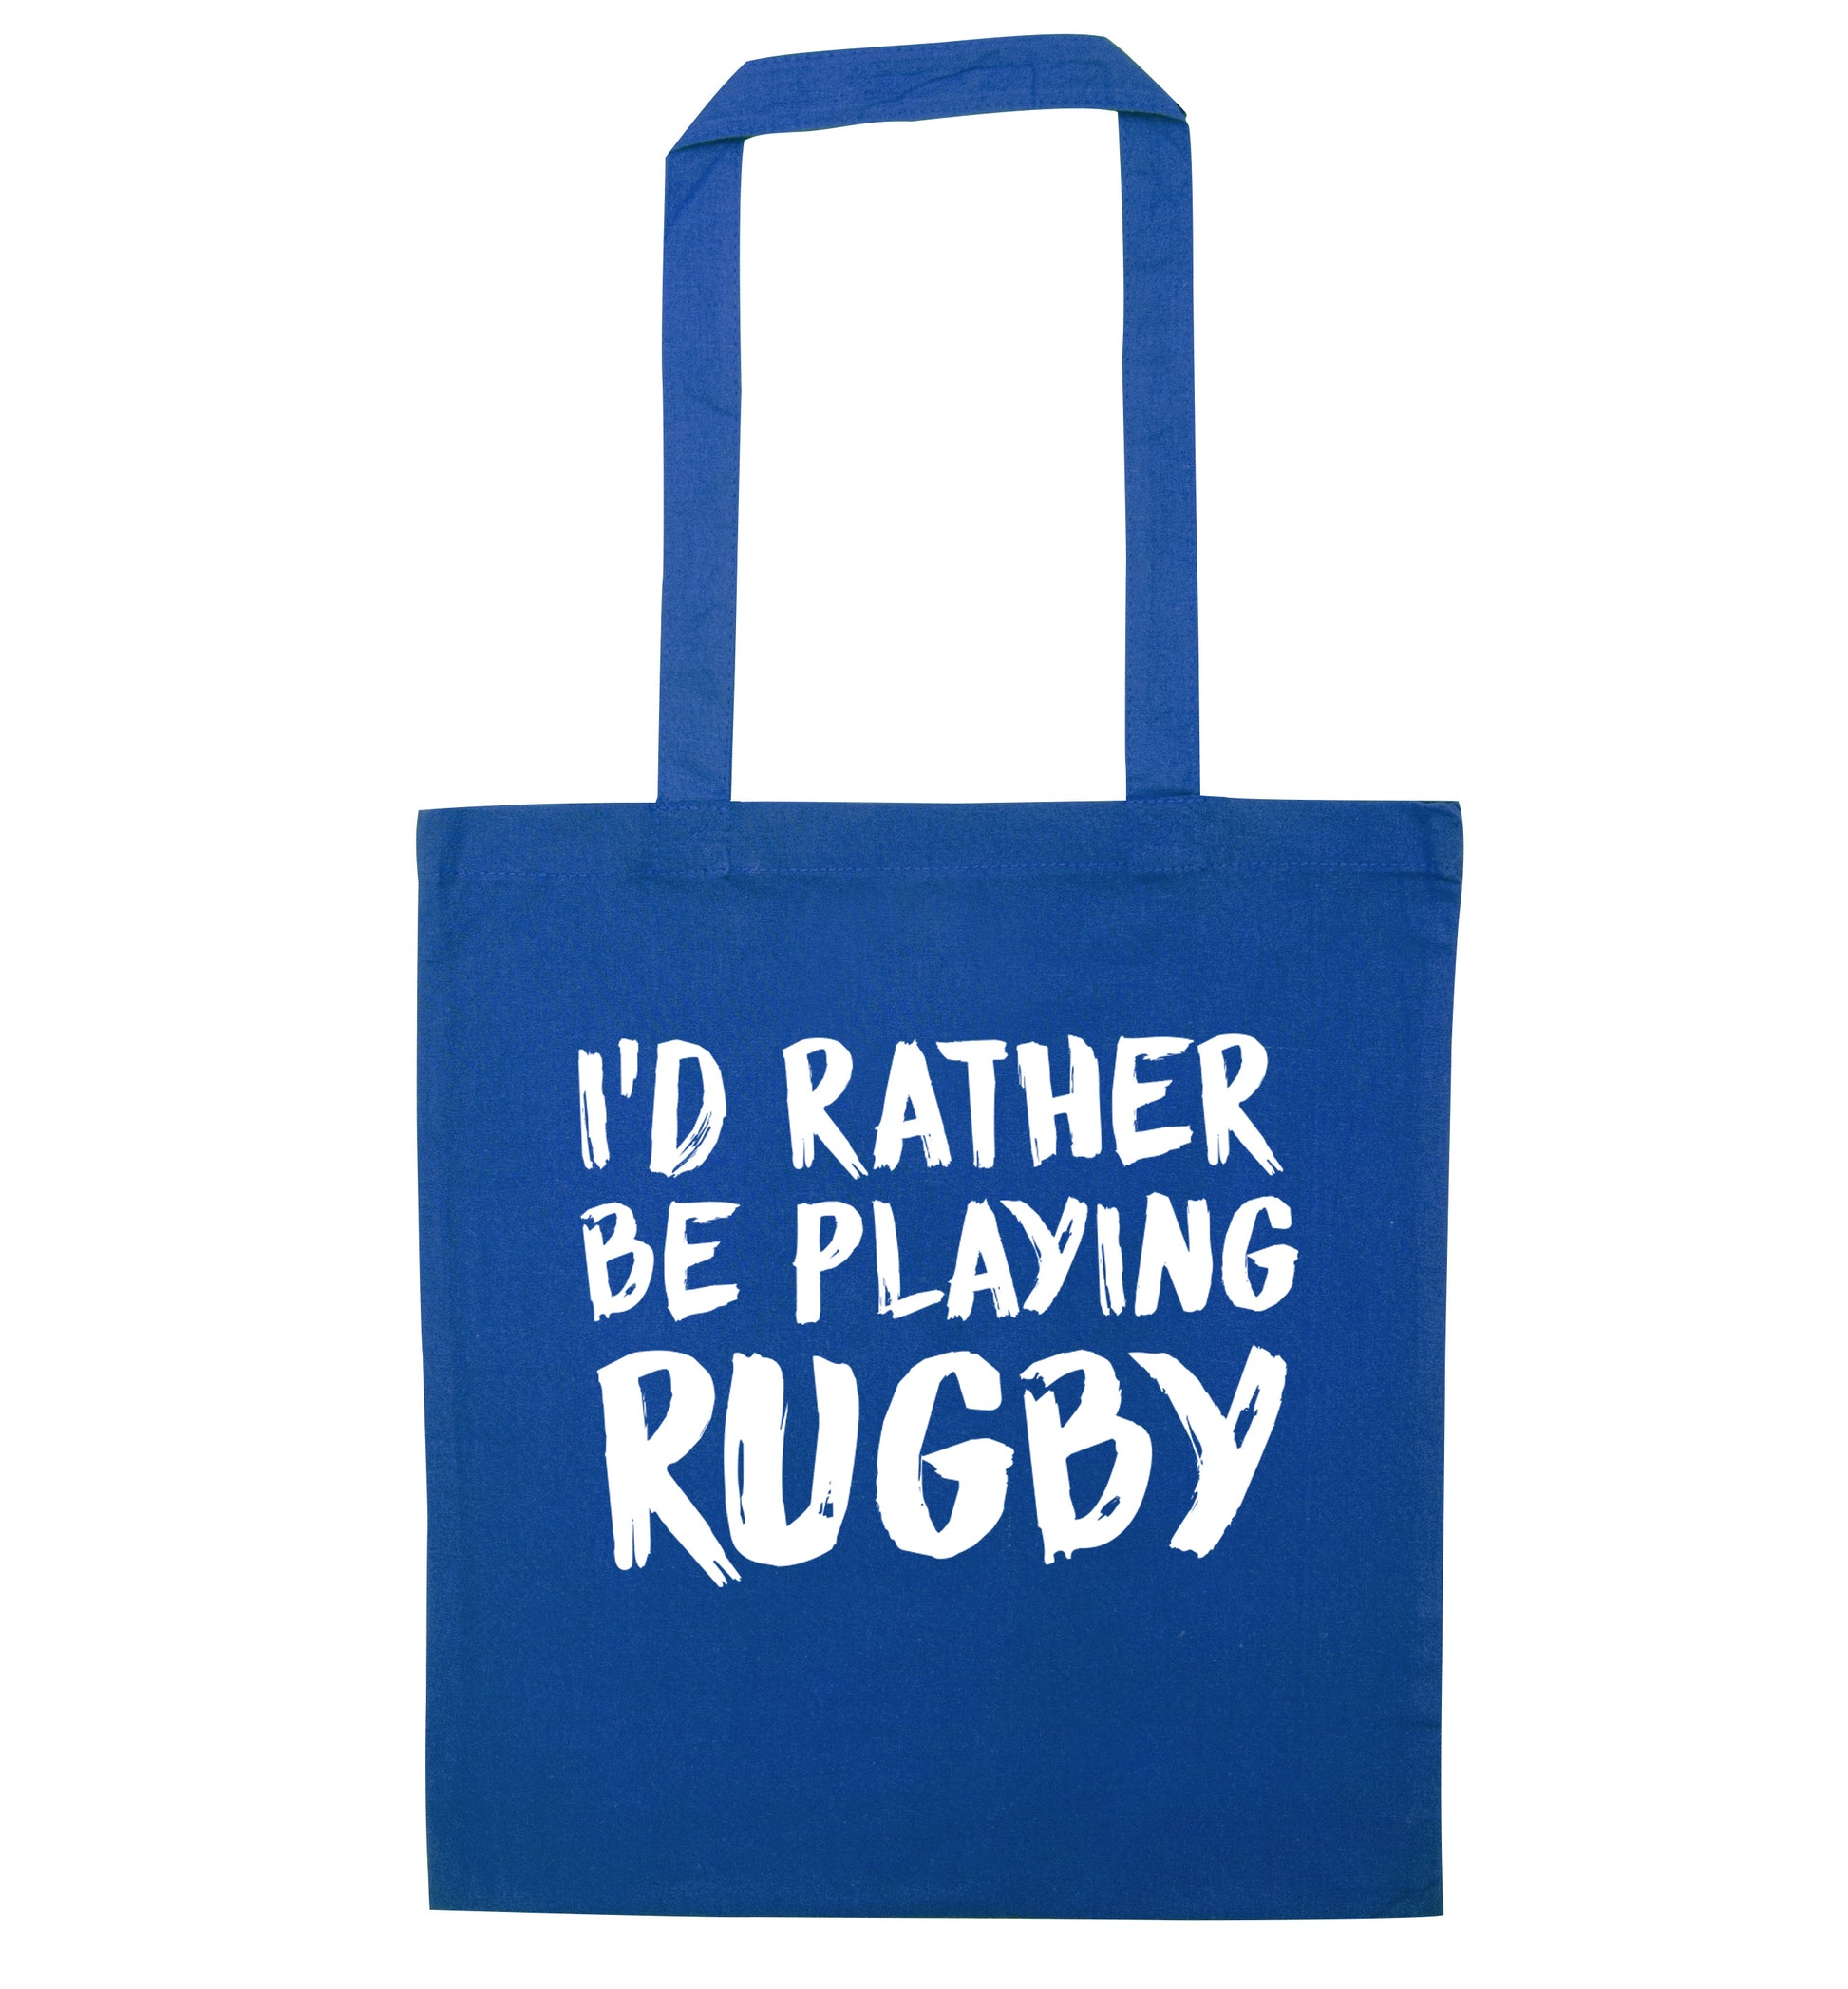 I'd rather be playing rugby blue tote bag